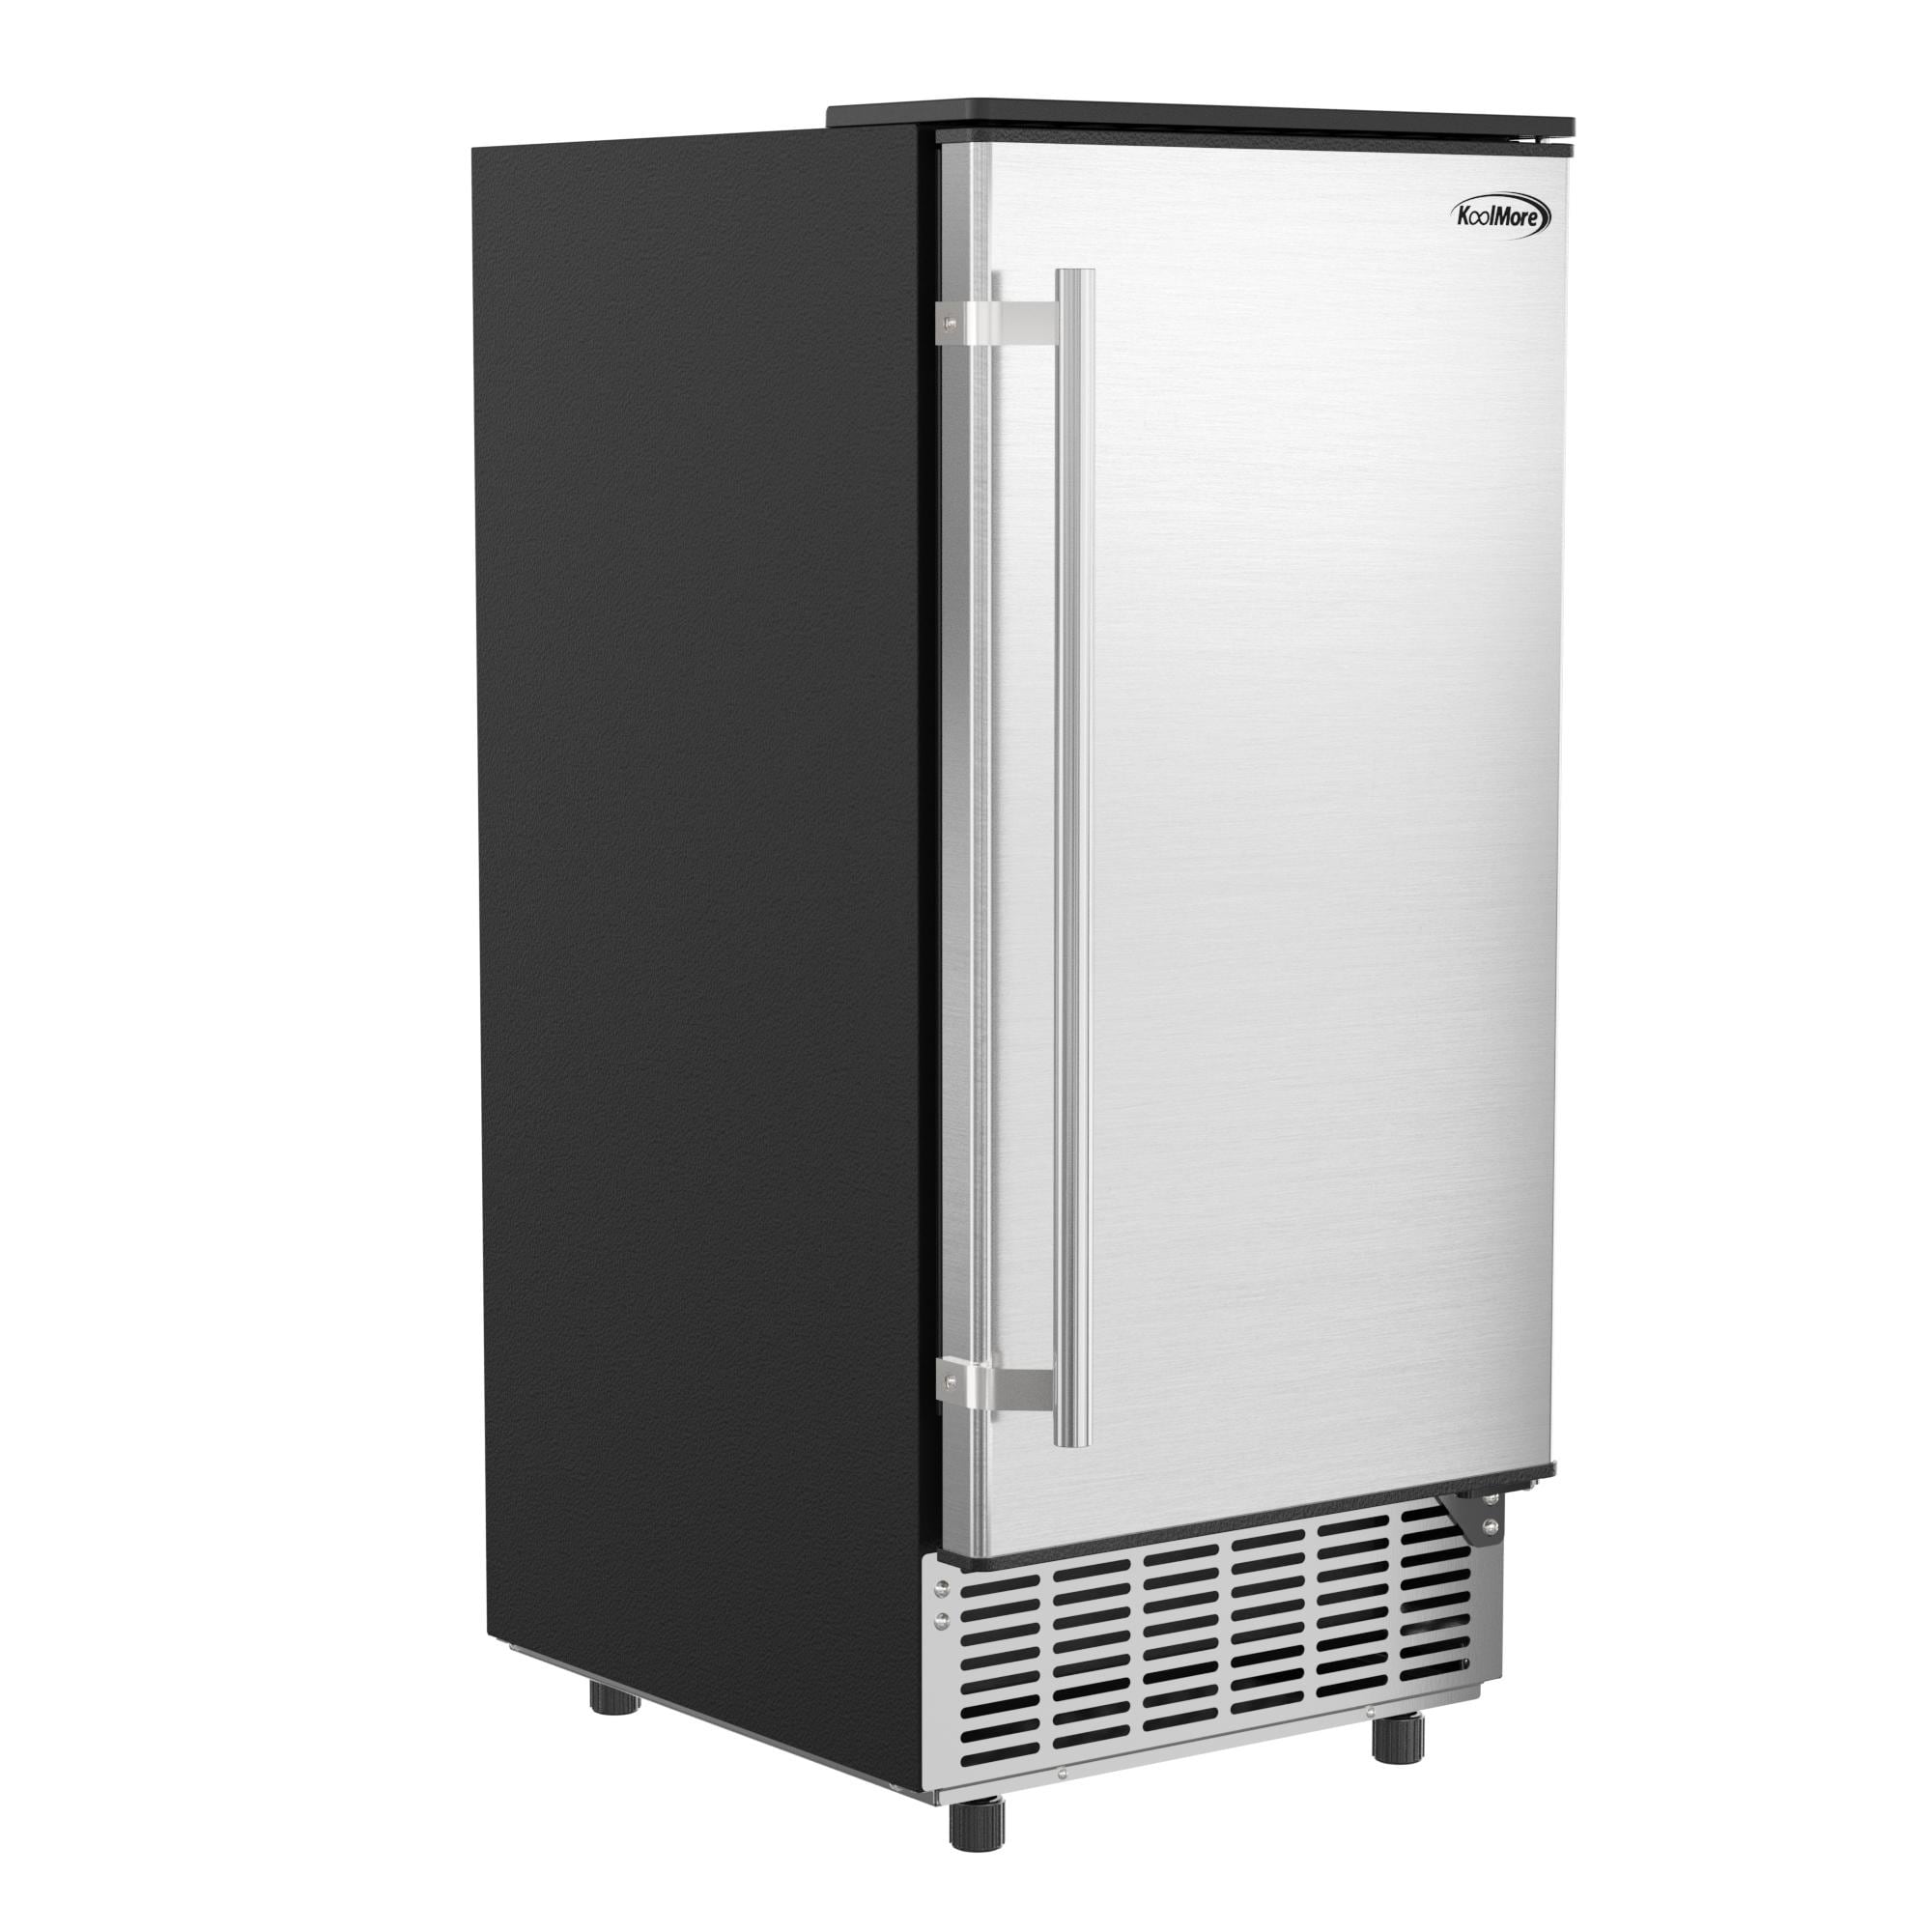 https://ak1.ostkcdn.com/images/products/is/images/direct/63bb4446d4aa82cd55c71a109bc95fa5c34fda5c/15-in.-W-25-lb.-Free-standing-Ice-Maker-in-Stainless-Steel.jpg